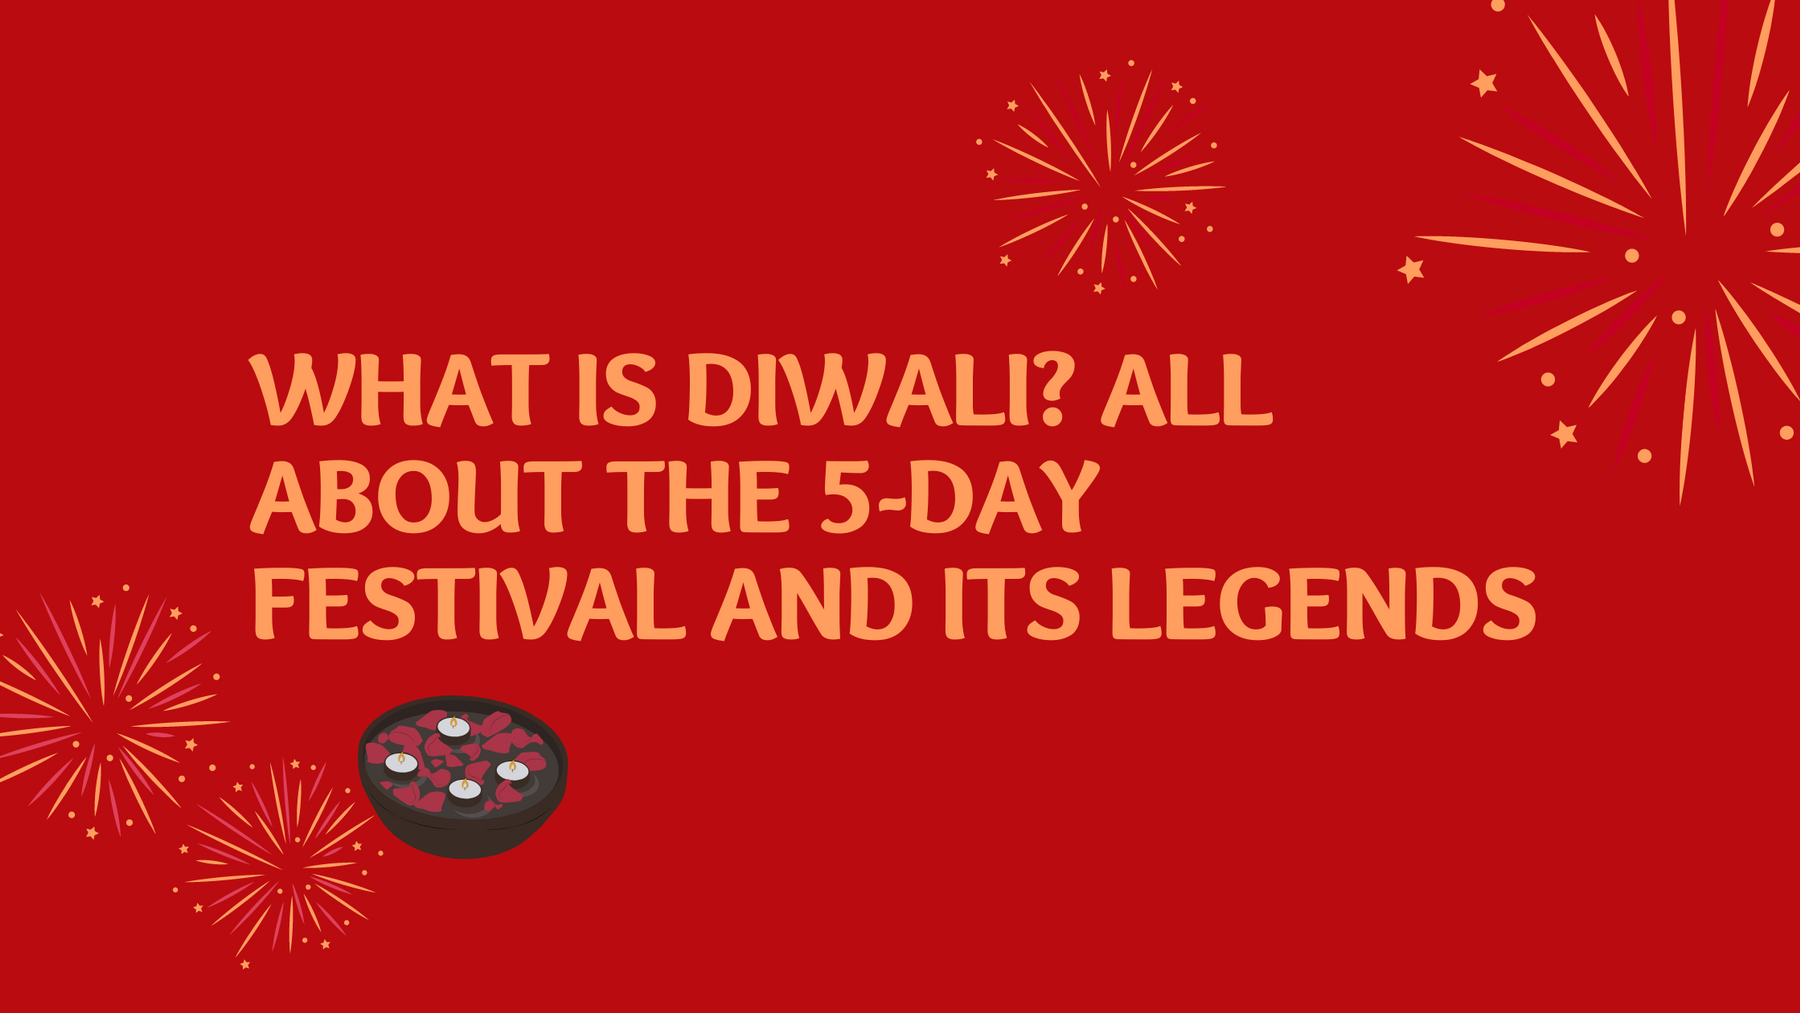 What is Diwali? All About the 5-day Festival and its Legends